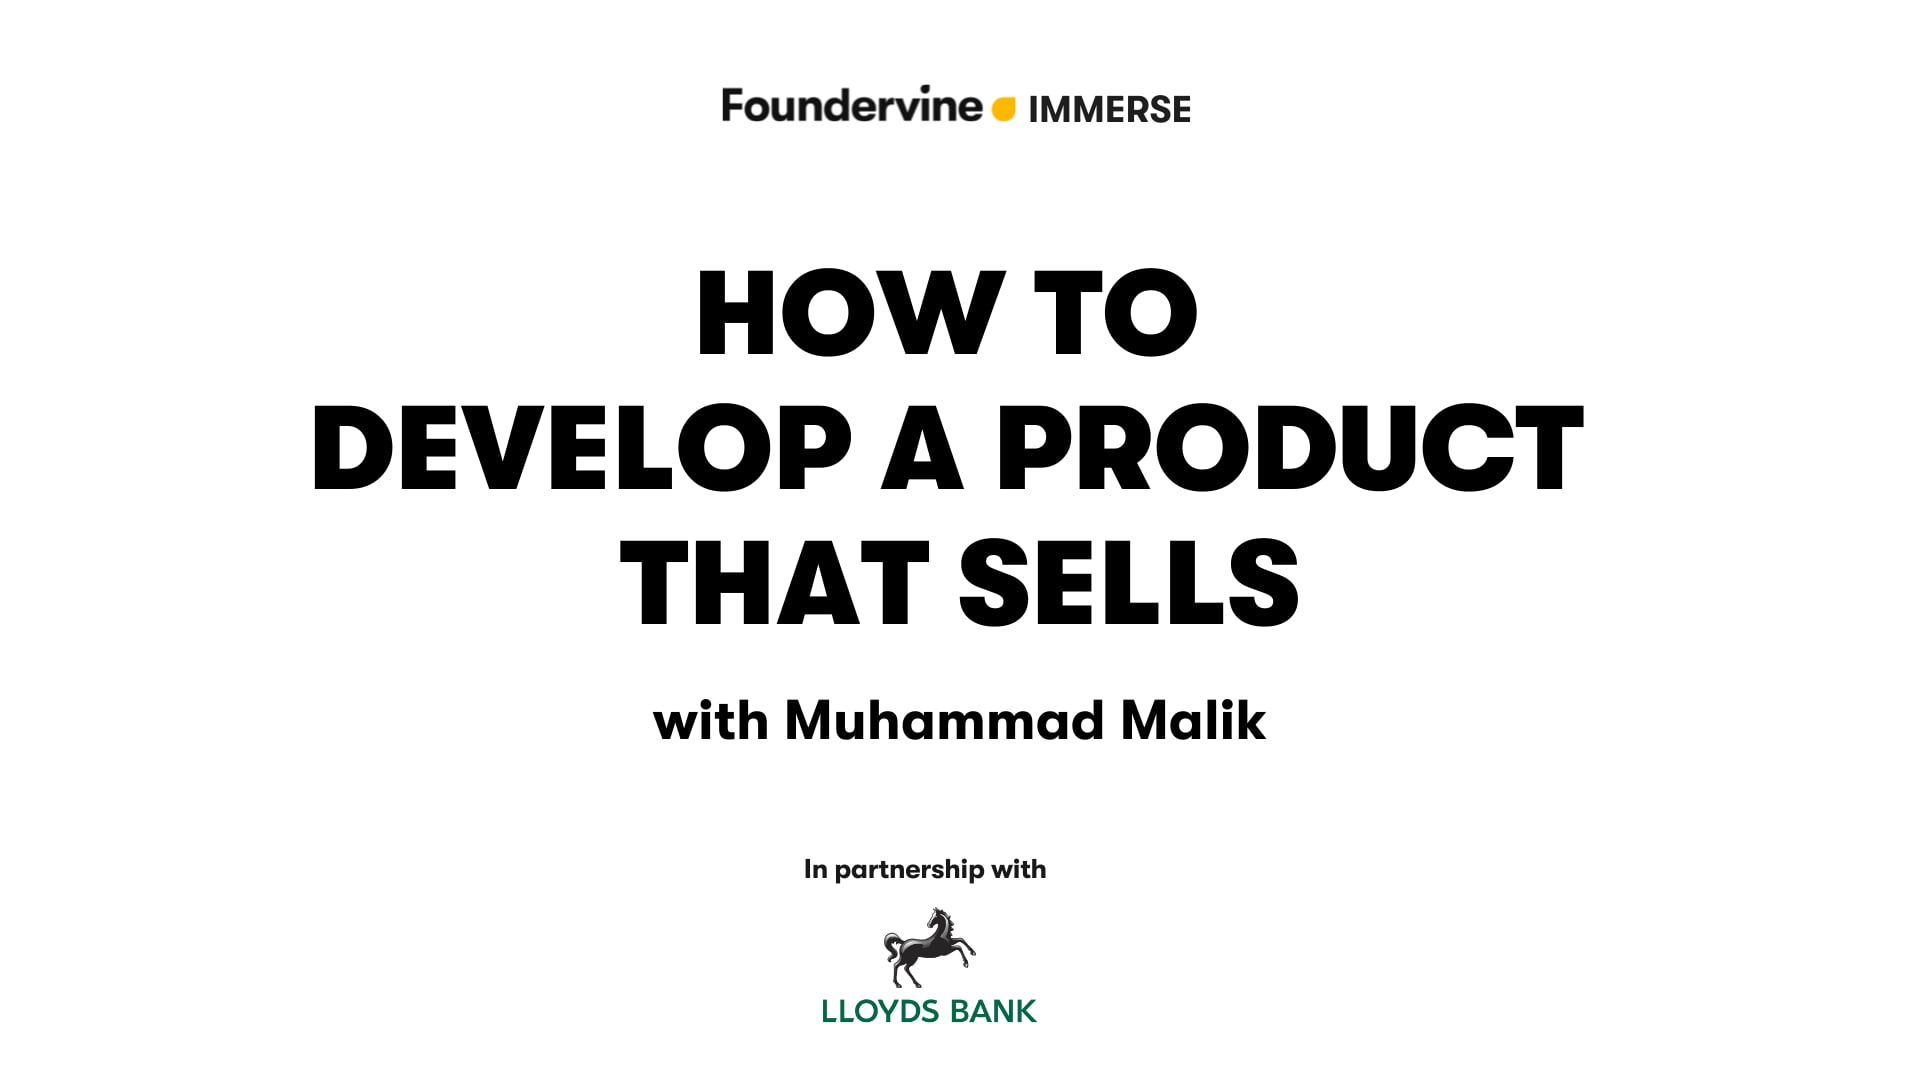 How to develop a product that sells with Muhammad Malik